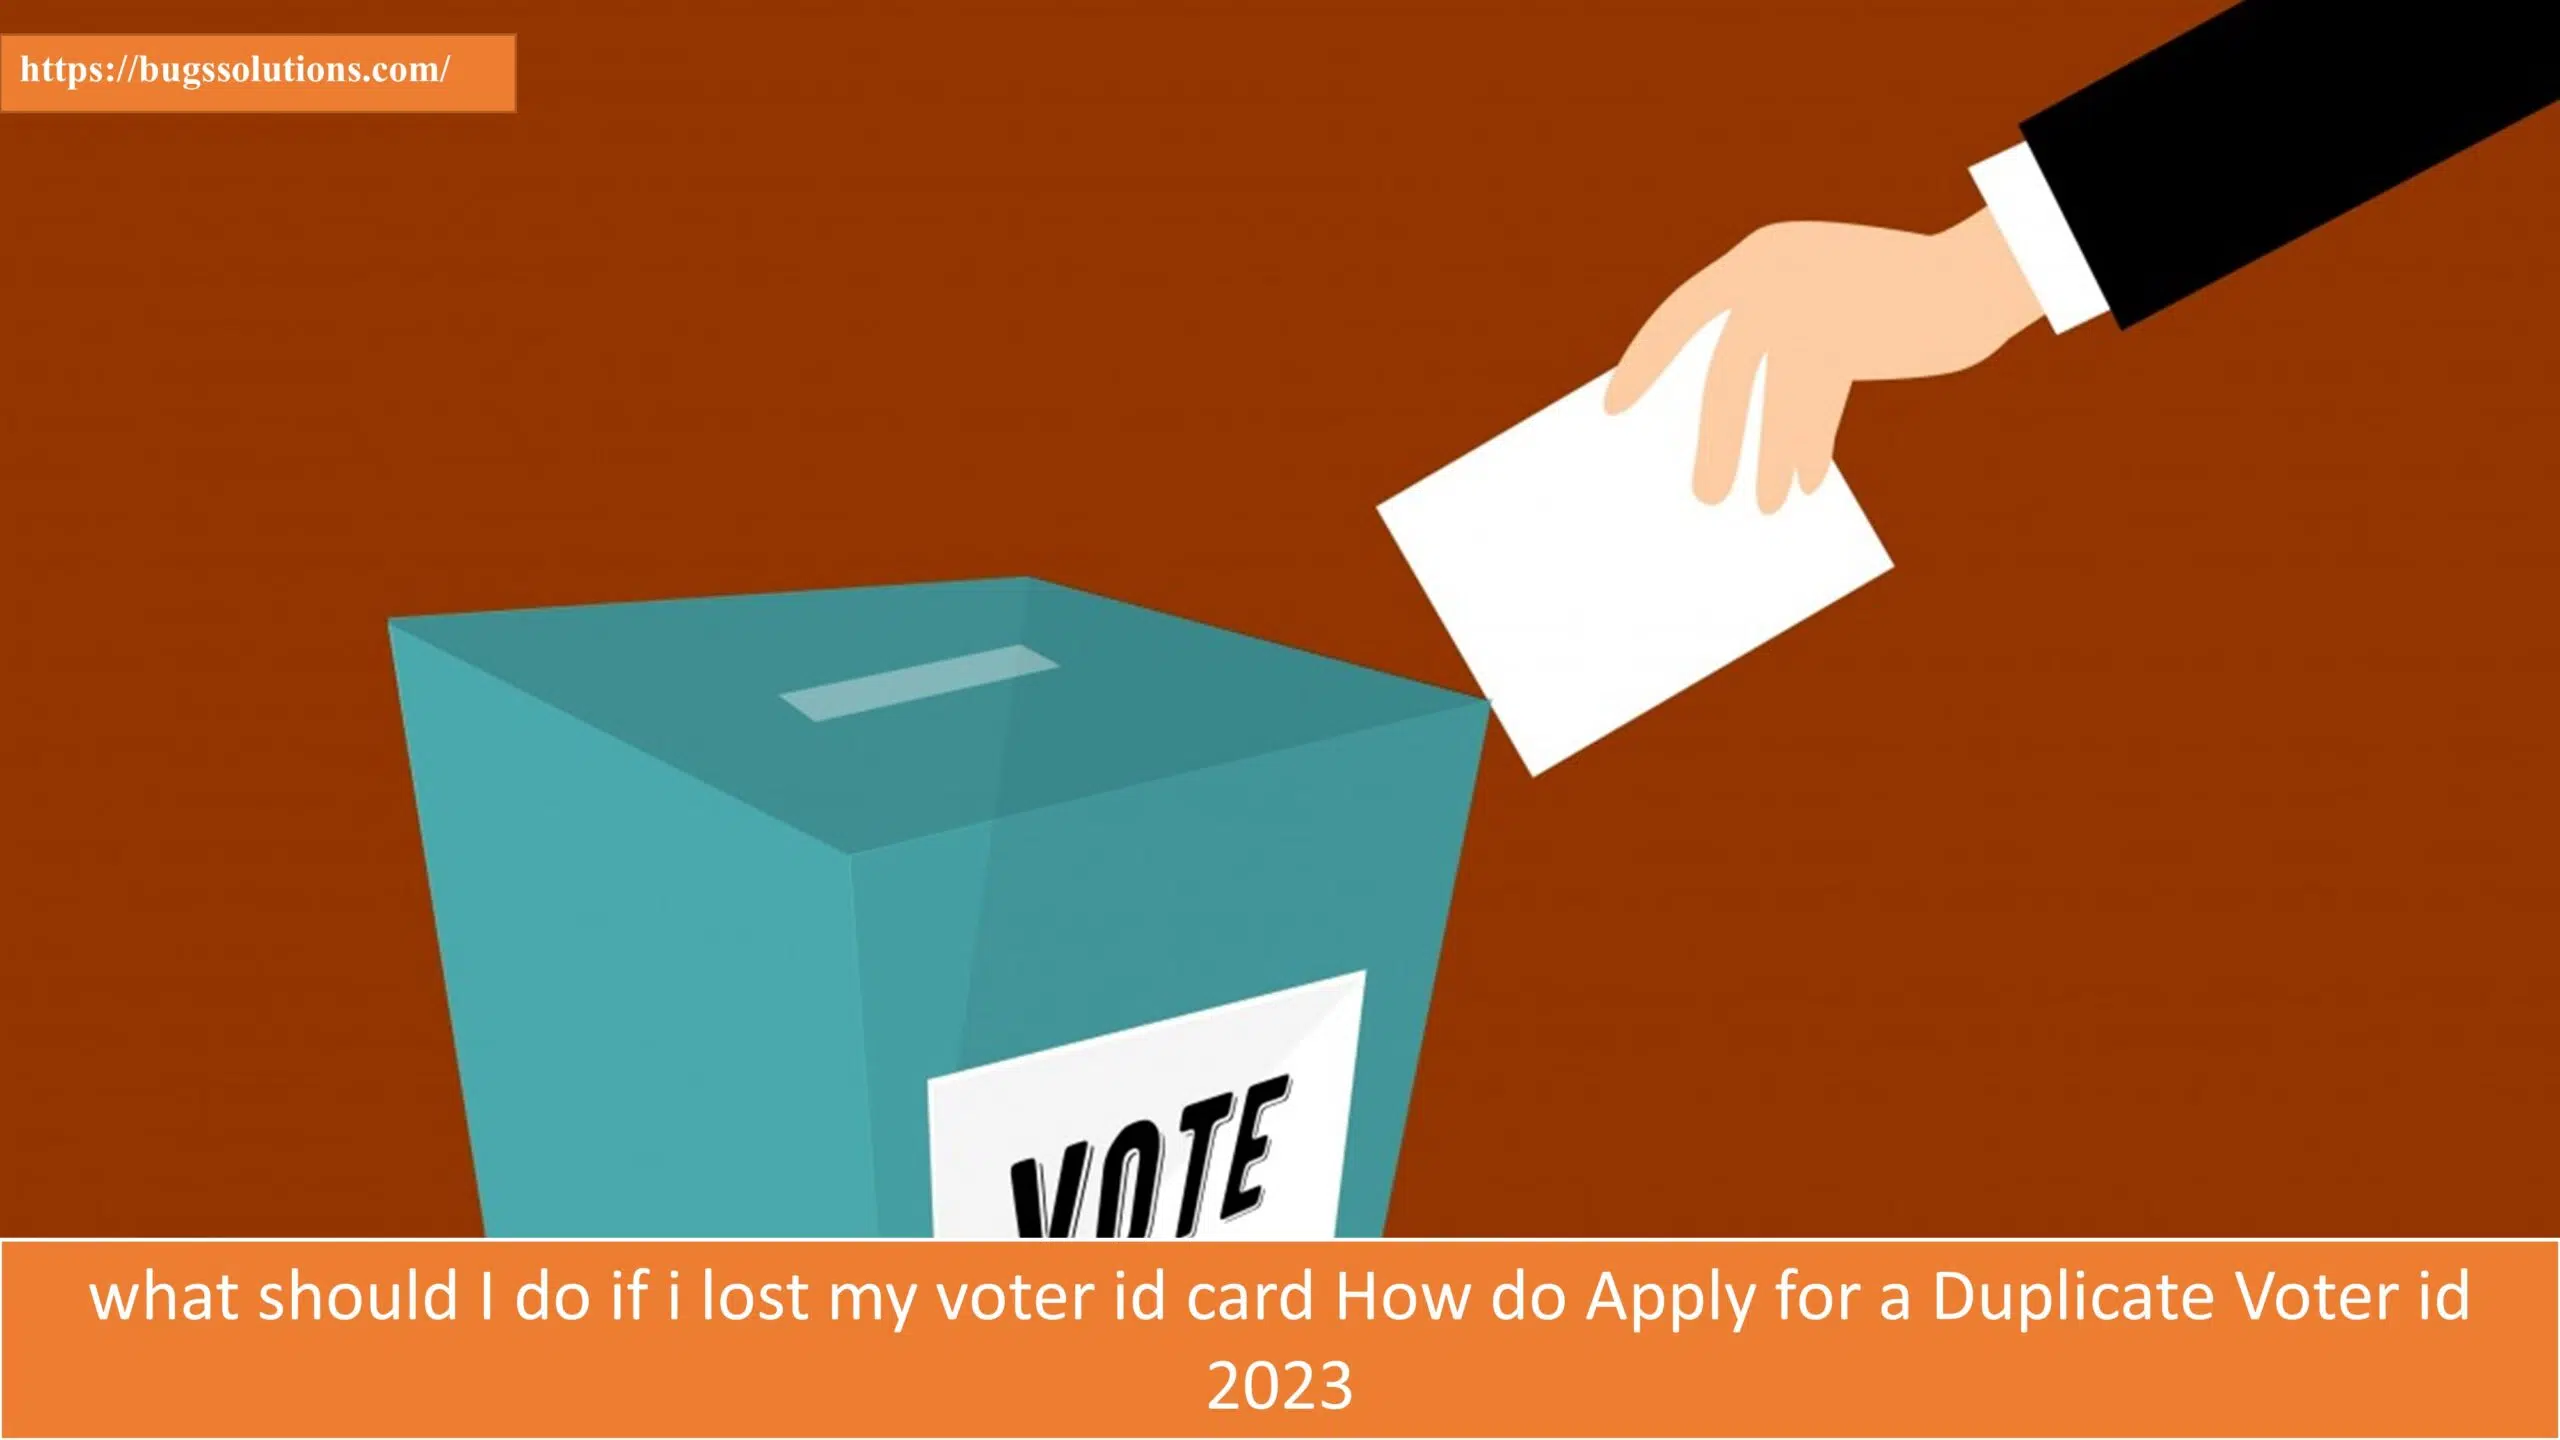 what should I do if i lost my voter id card How do Apply for a Duplicate Voter id 2023